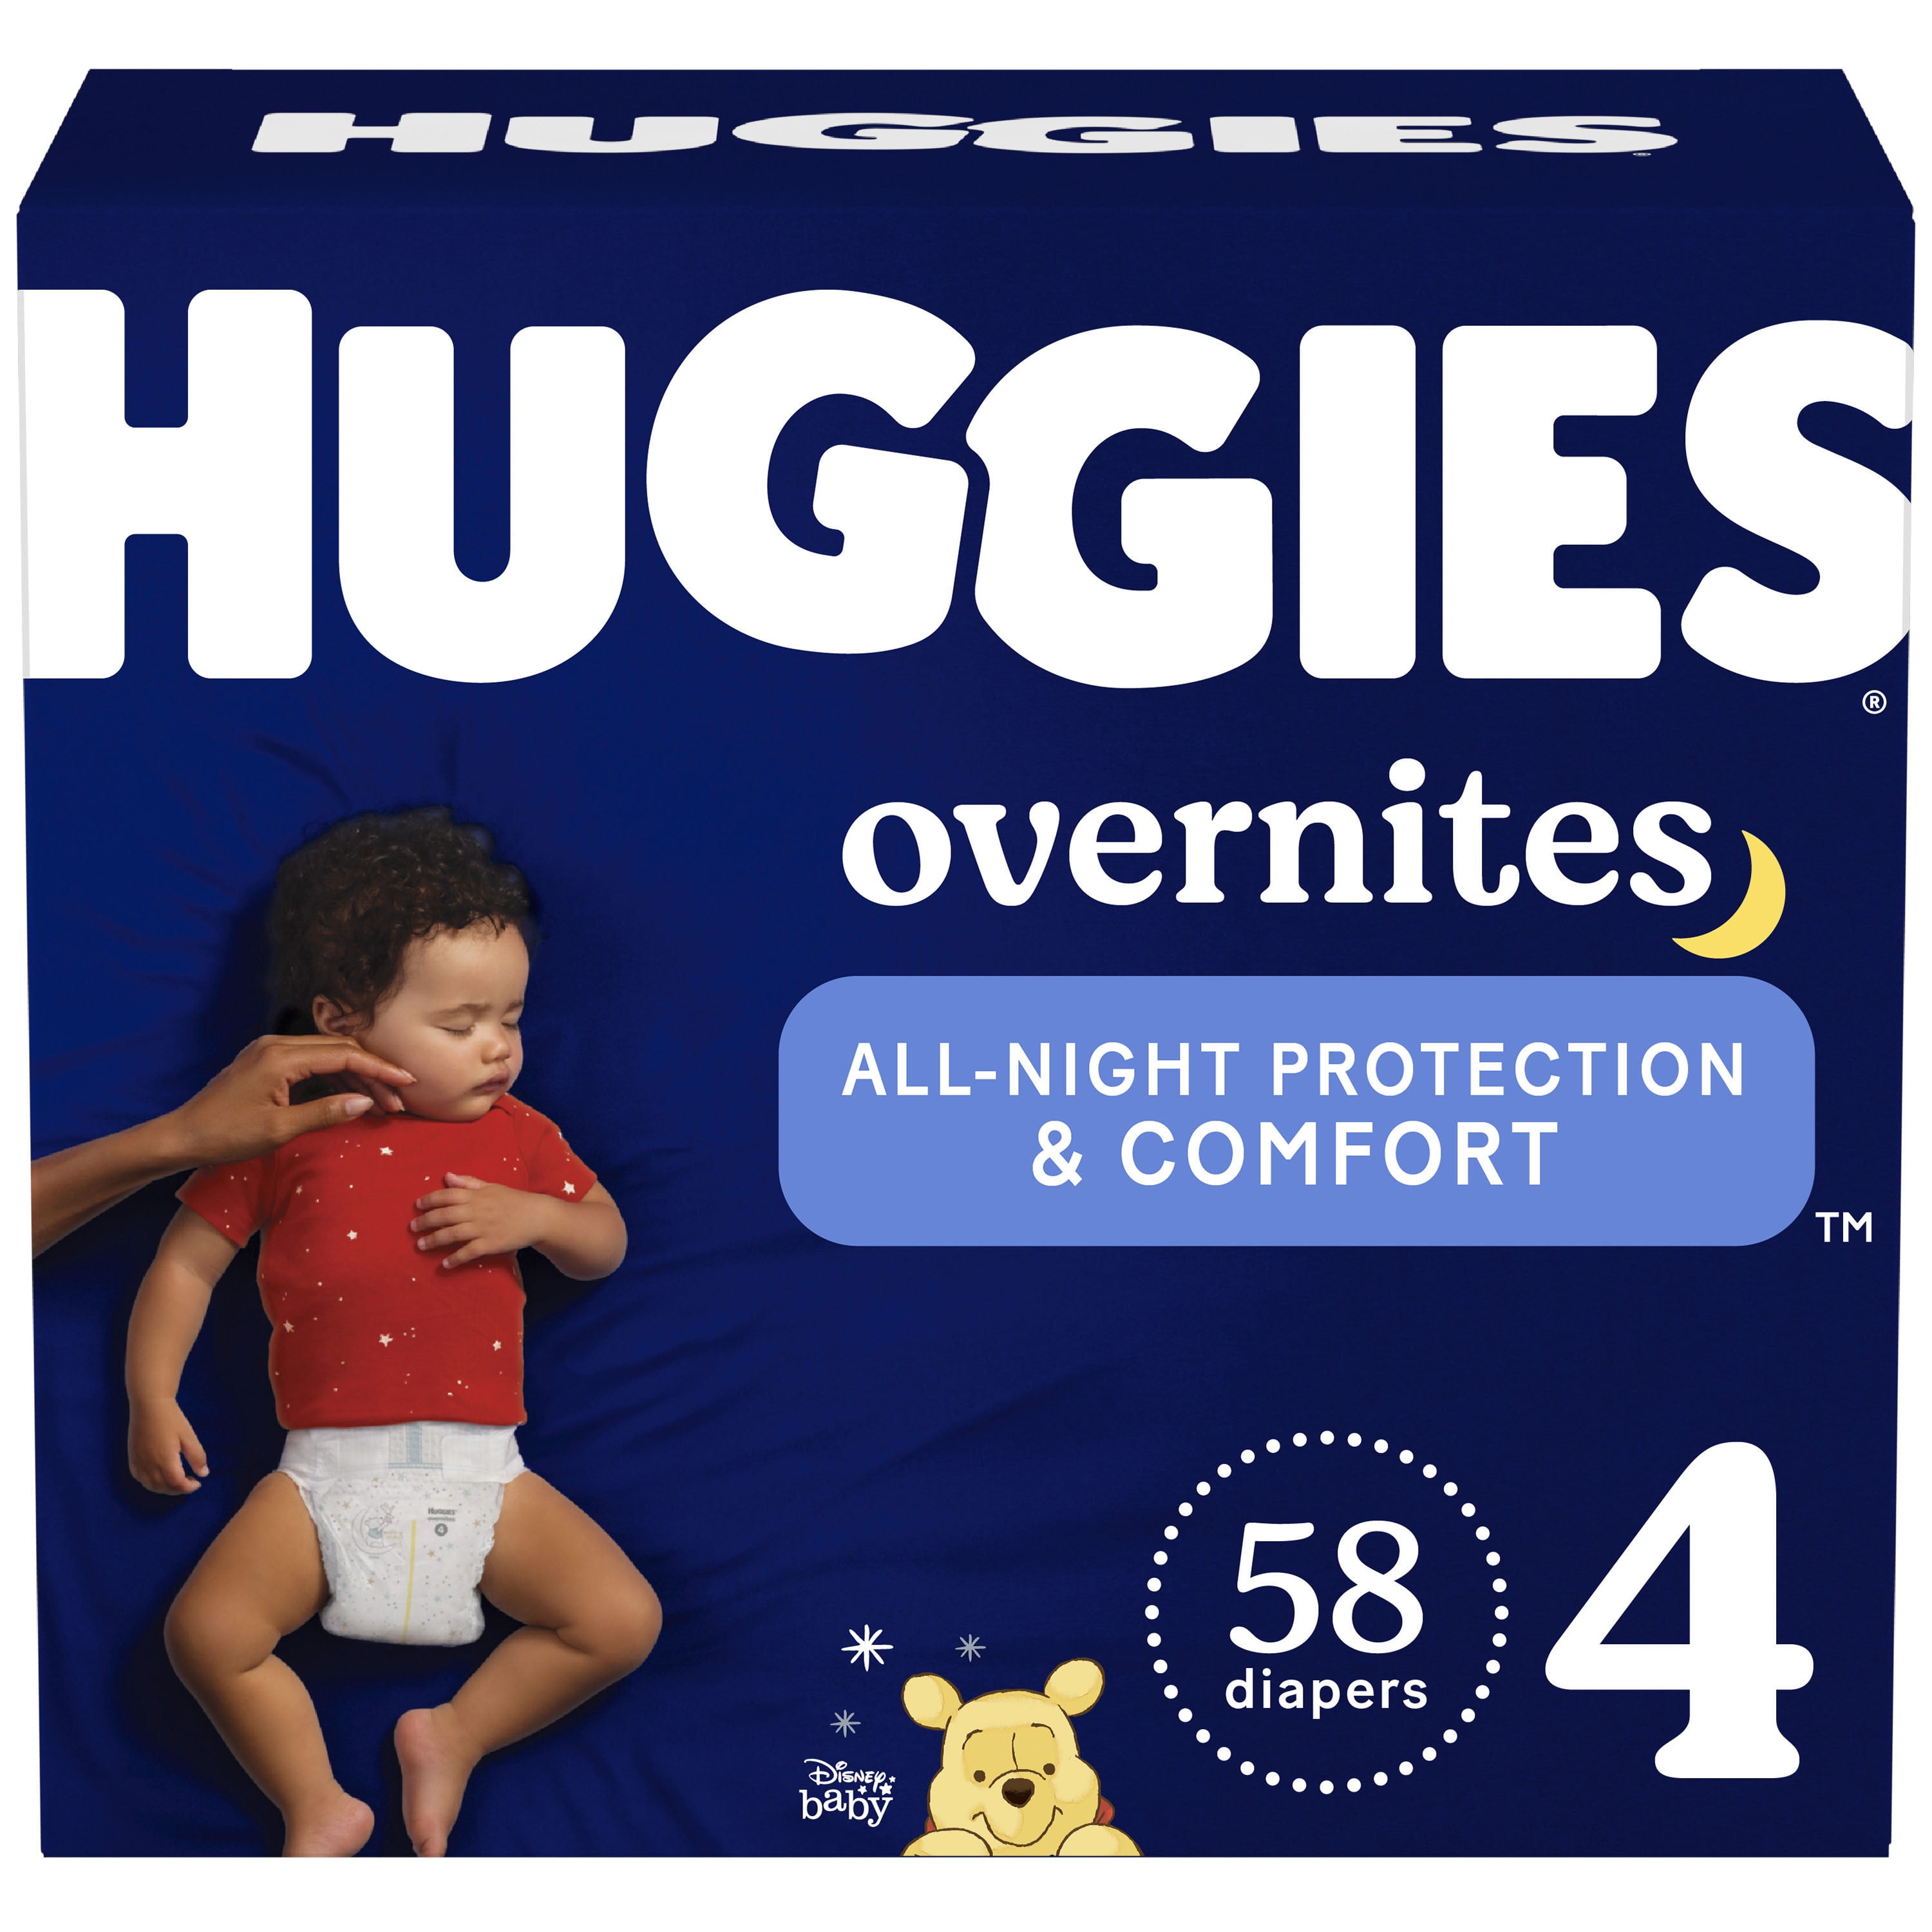 Huggies Overnites Nighttime Baby Diapers, Size 4, 58 Ct 